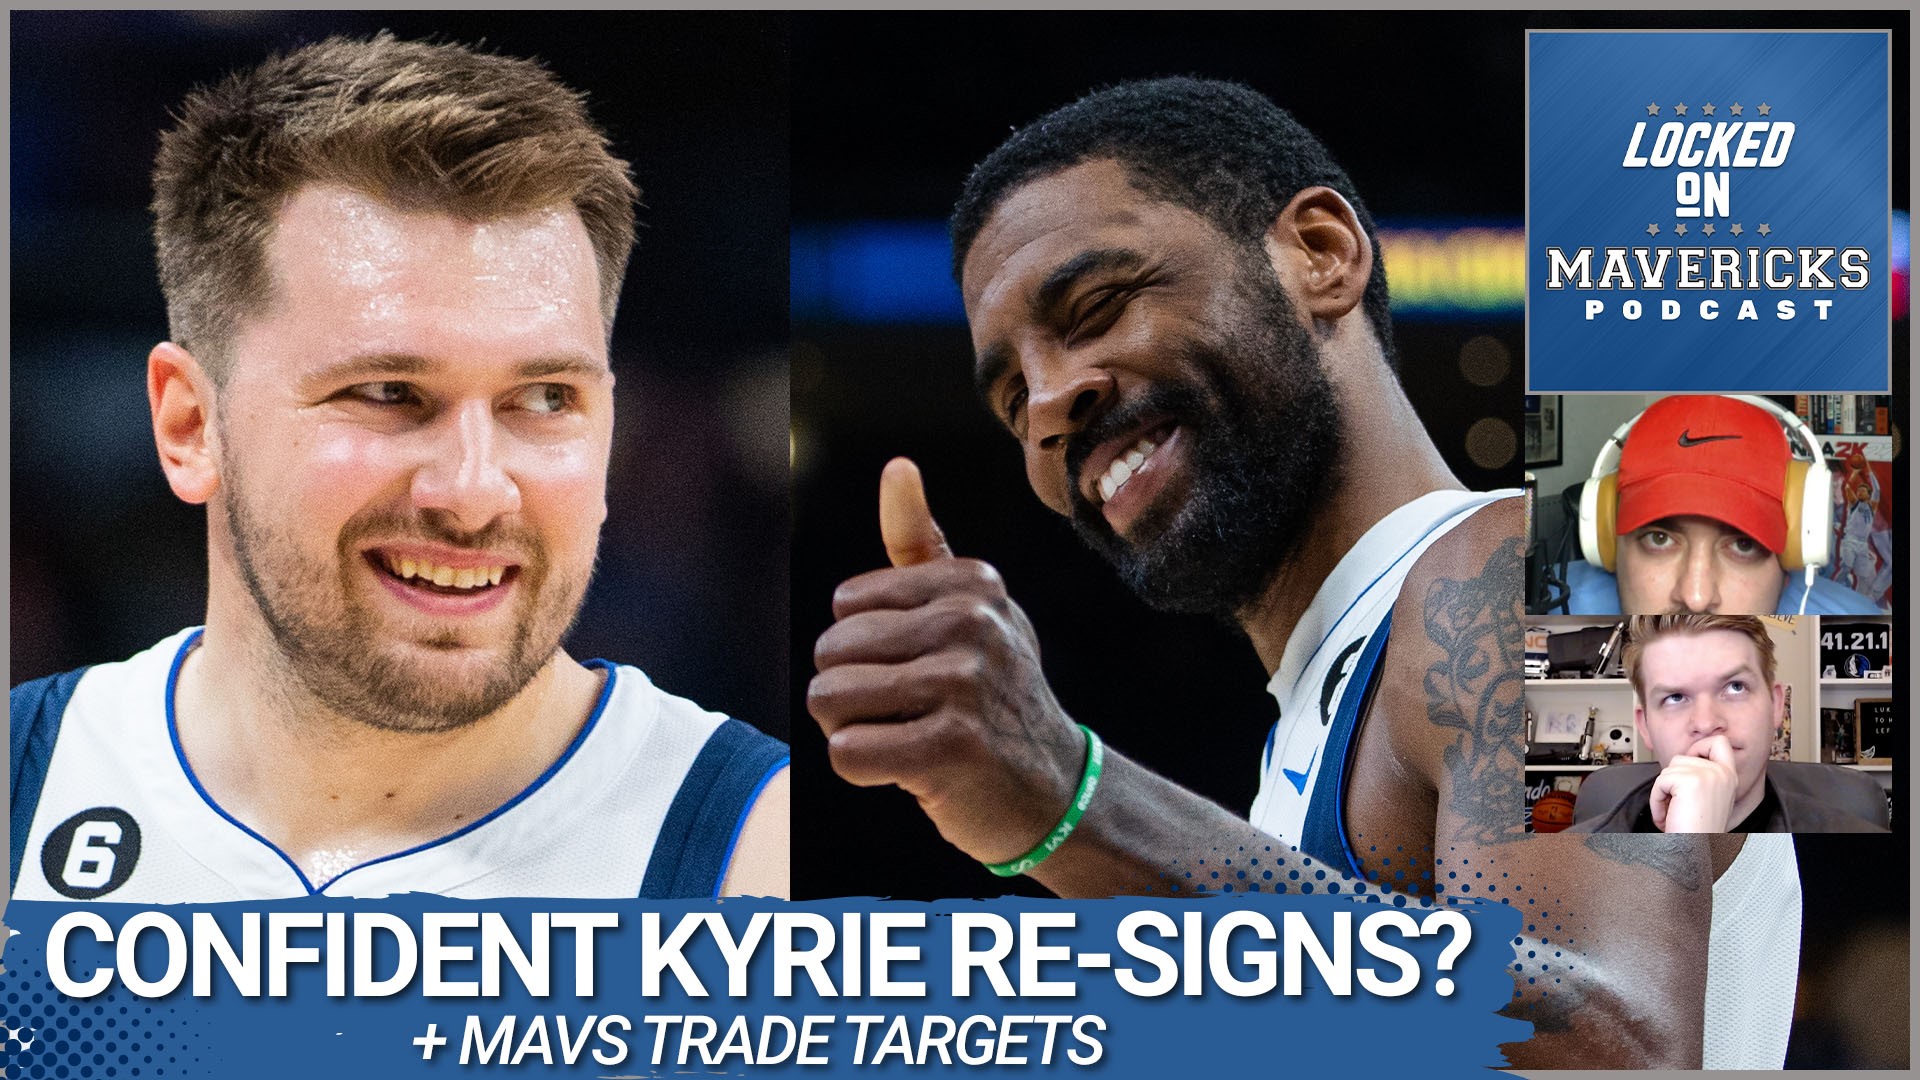 Nick Angstadt & Isaac Harris discuss the rumor that the Lakers are no longer interested in Kyrie Irving and how badly the Dallas Mavericks need him to re-sign.